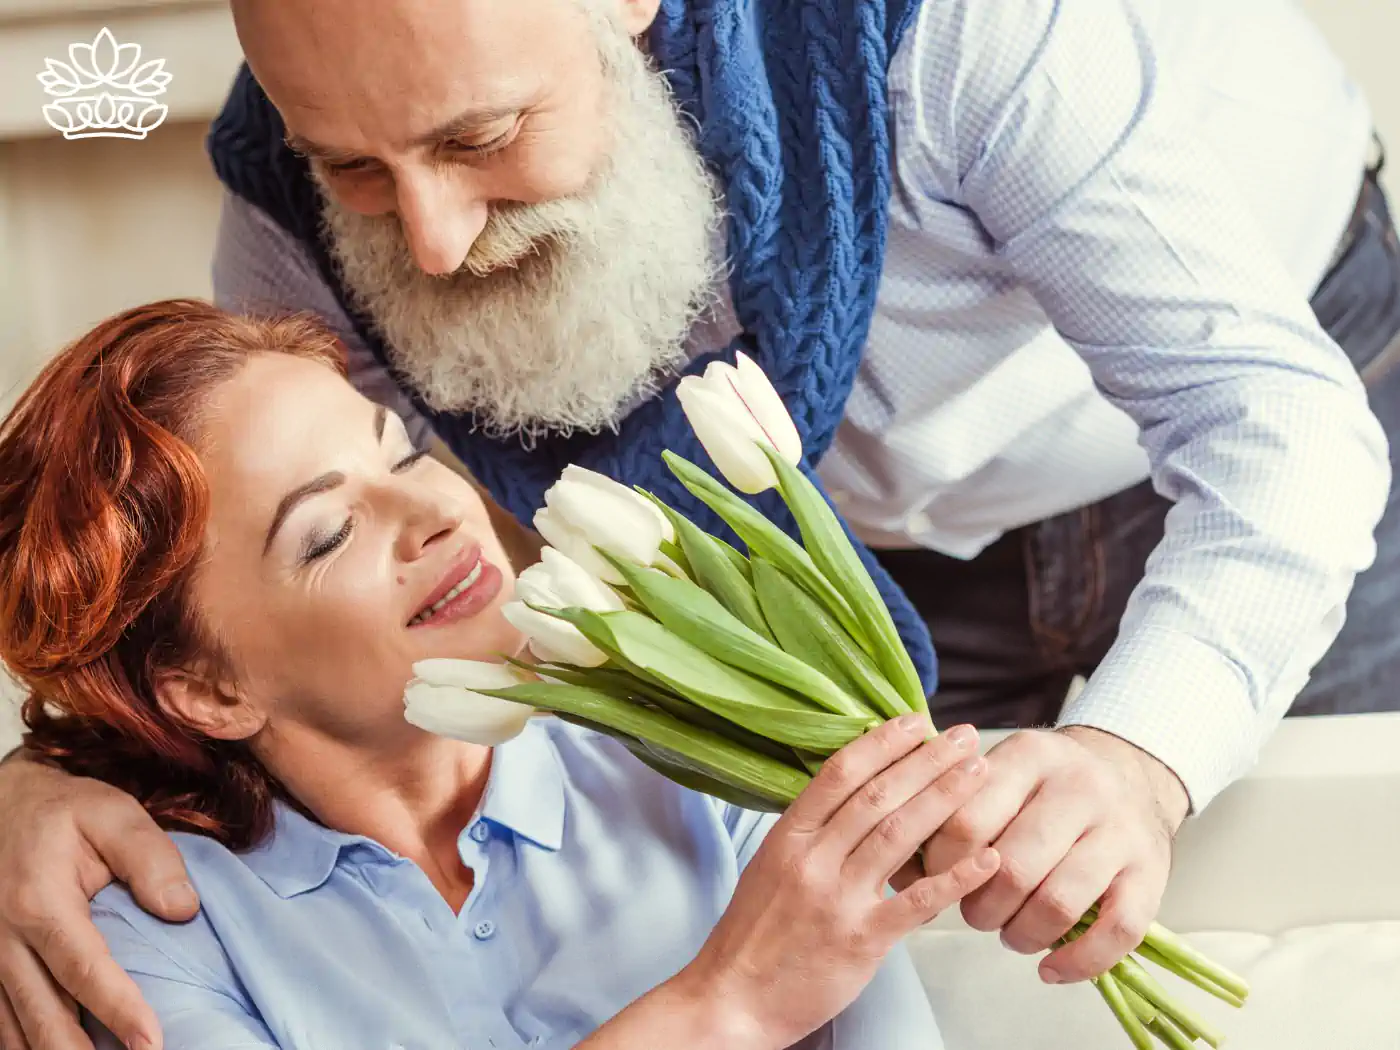 An older man with a beard surprises a delighted woman with a bouquet of fresh white tulips, showcasing affection and happiness. Fabulous Flowers and Gifts delivered with heart. Valentine's Day Flowers.